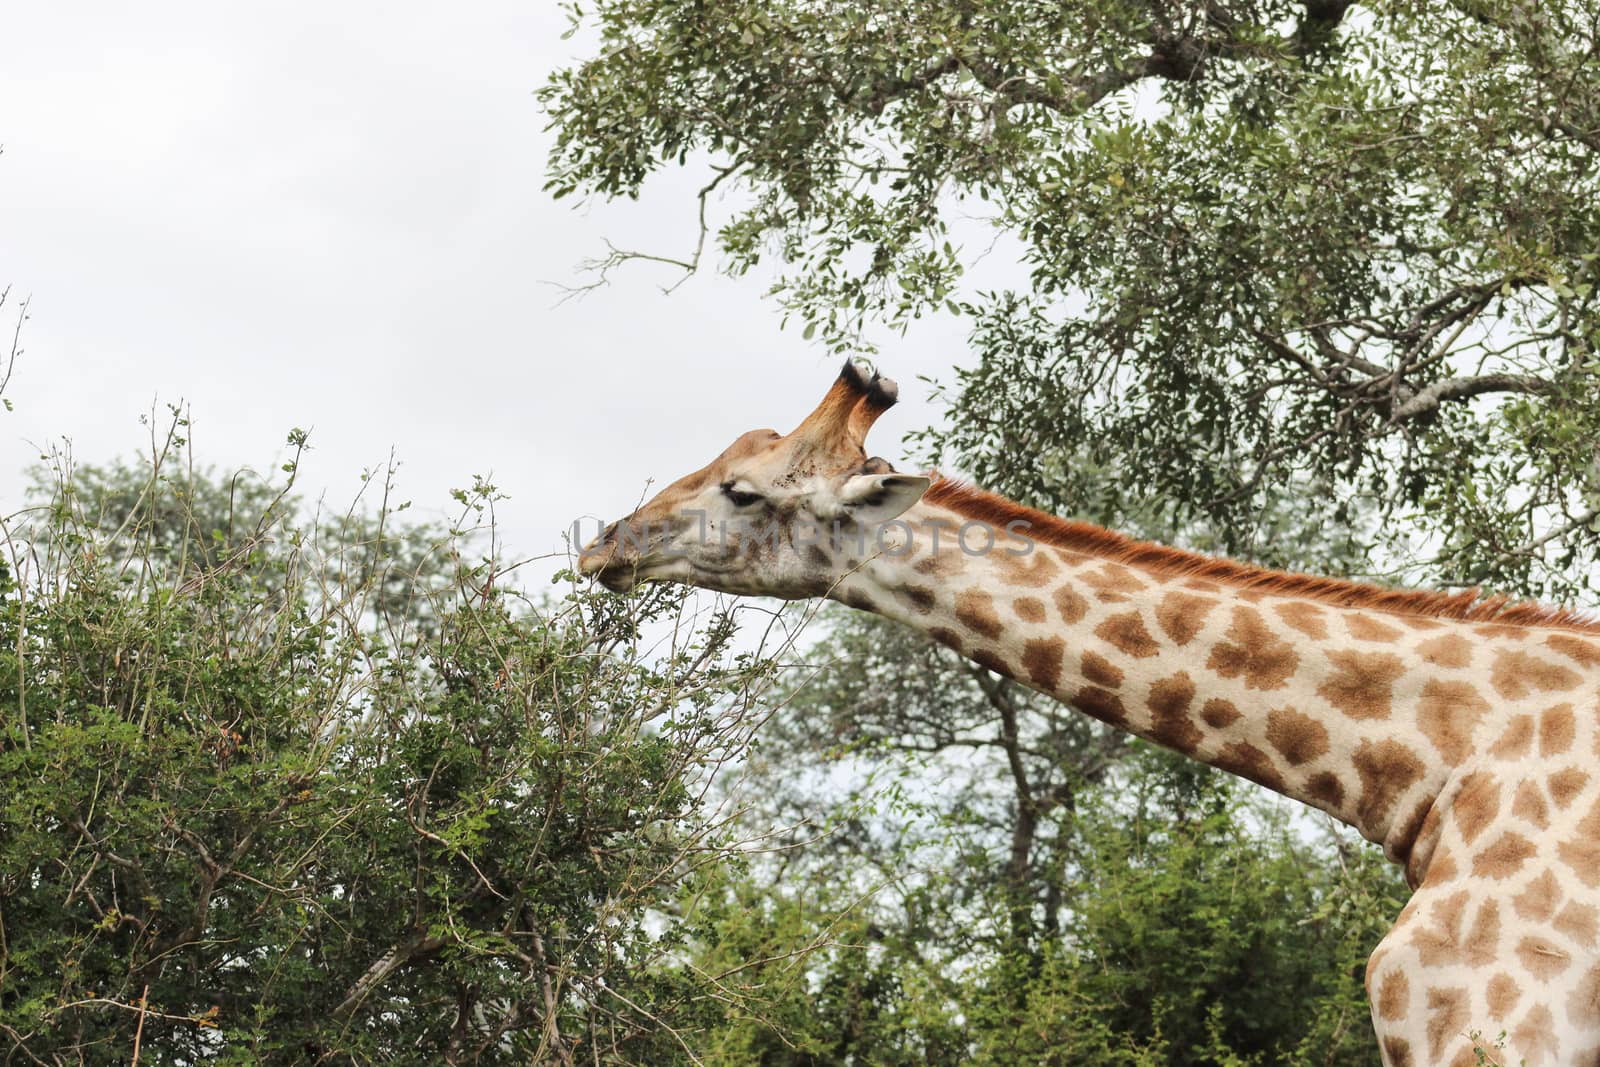 Giraffe in kruger national park reaching for leafs in a treetop